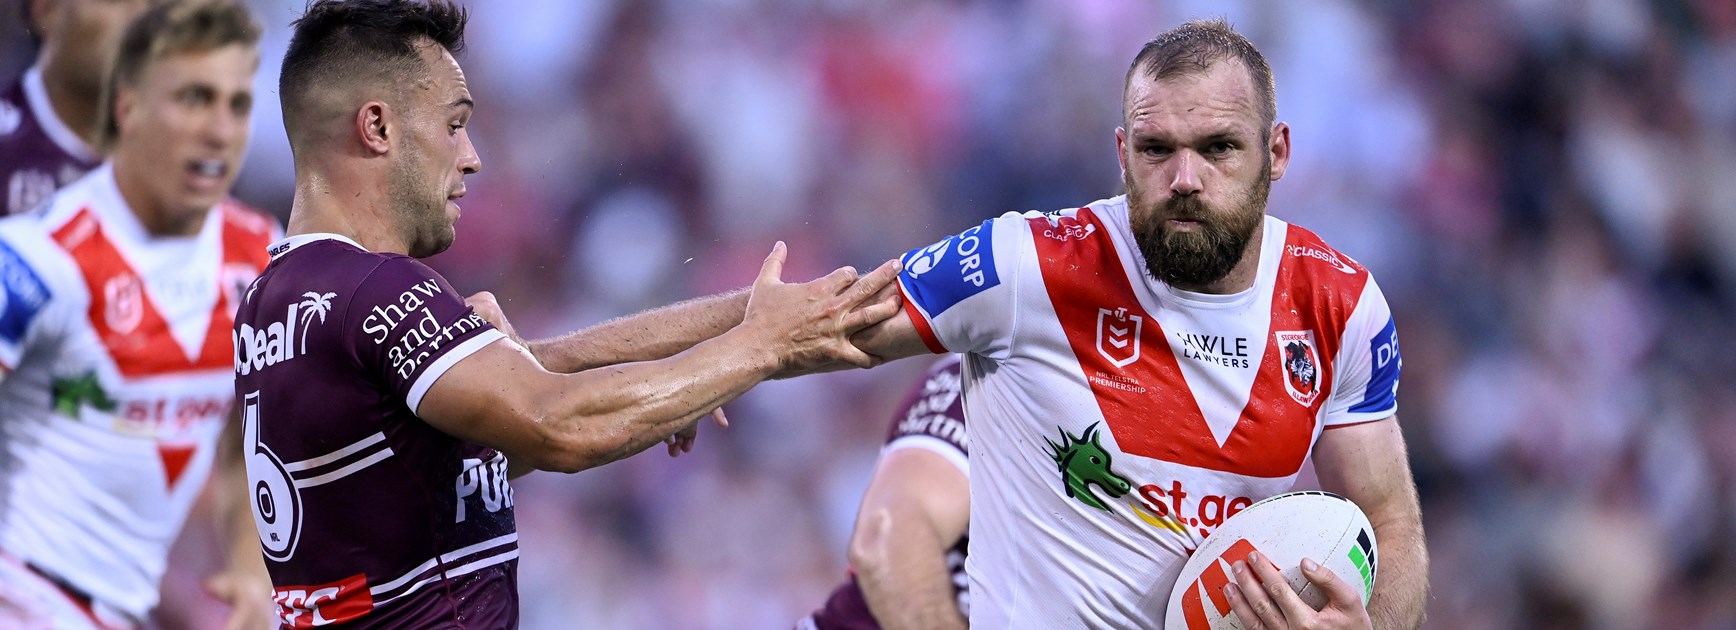 NRL Round 14 Match Preview: Dragons back in 'Gong for Friday night showdown